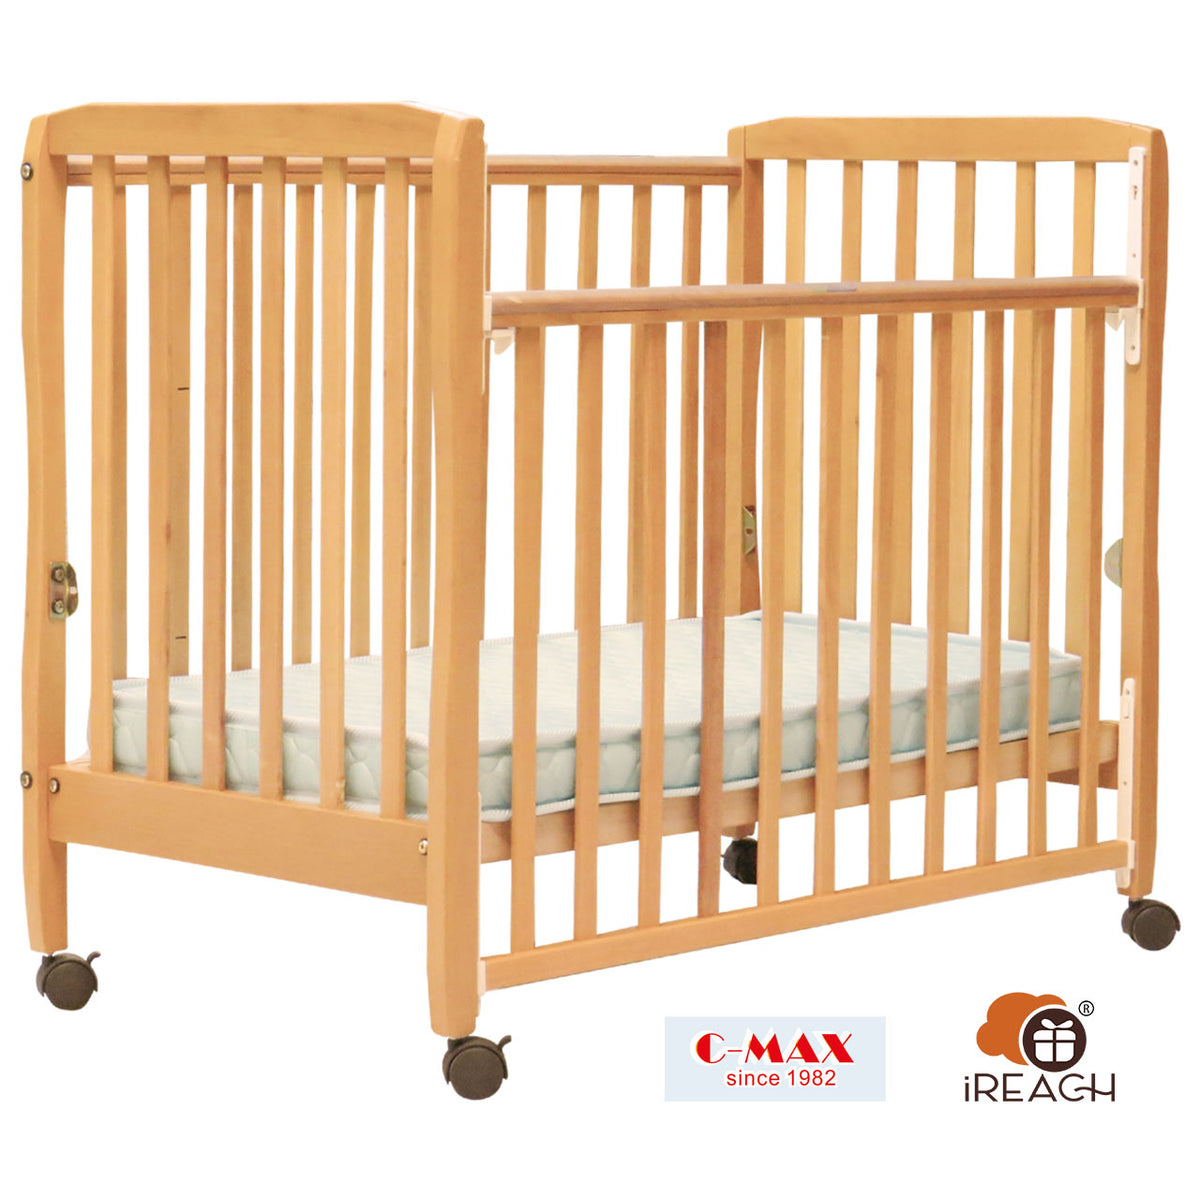 C-MAX Baby Cot Made From Natural Wood L112 X W62 X H92cm No.108